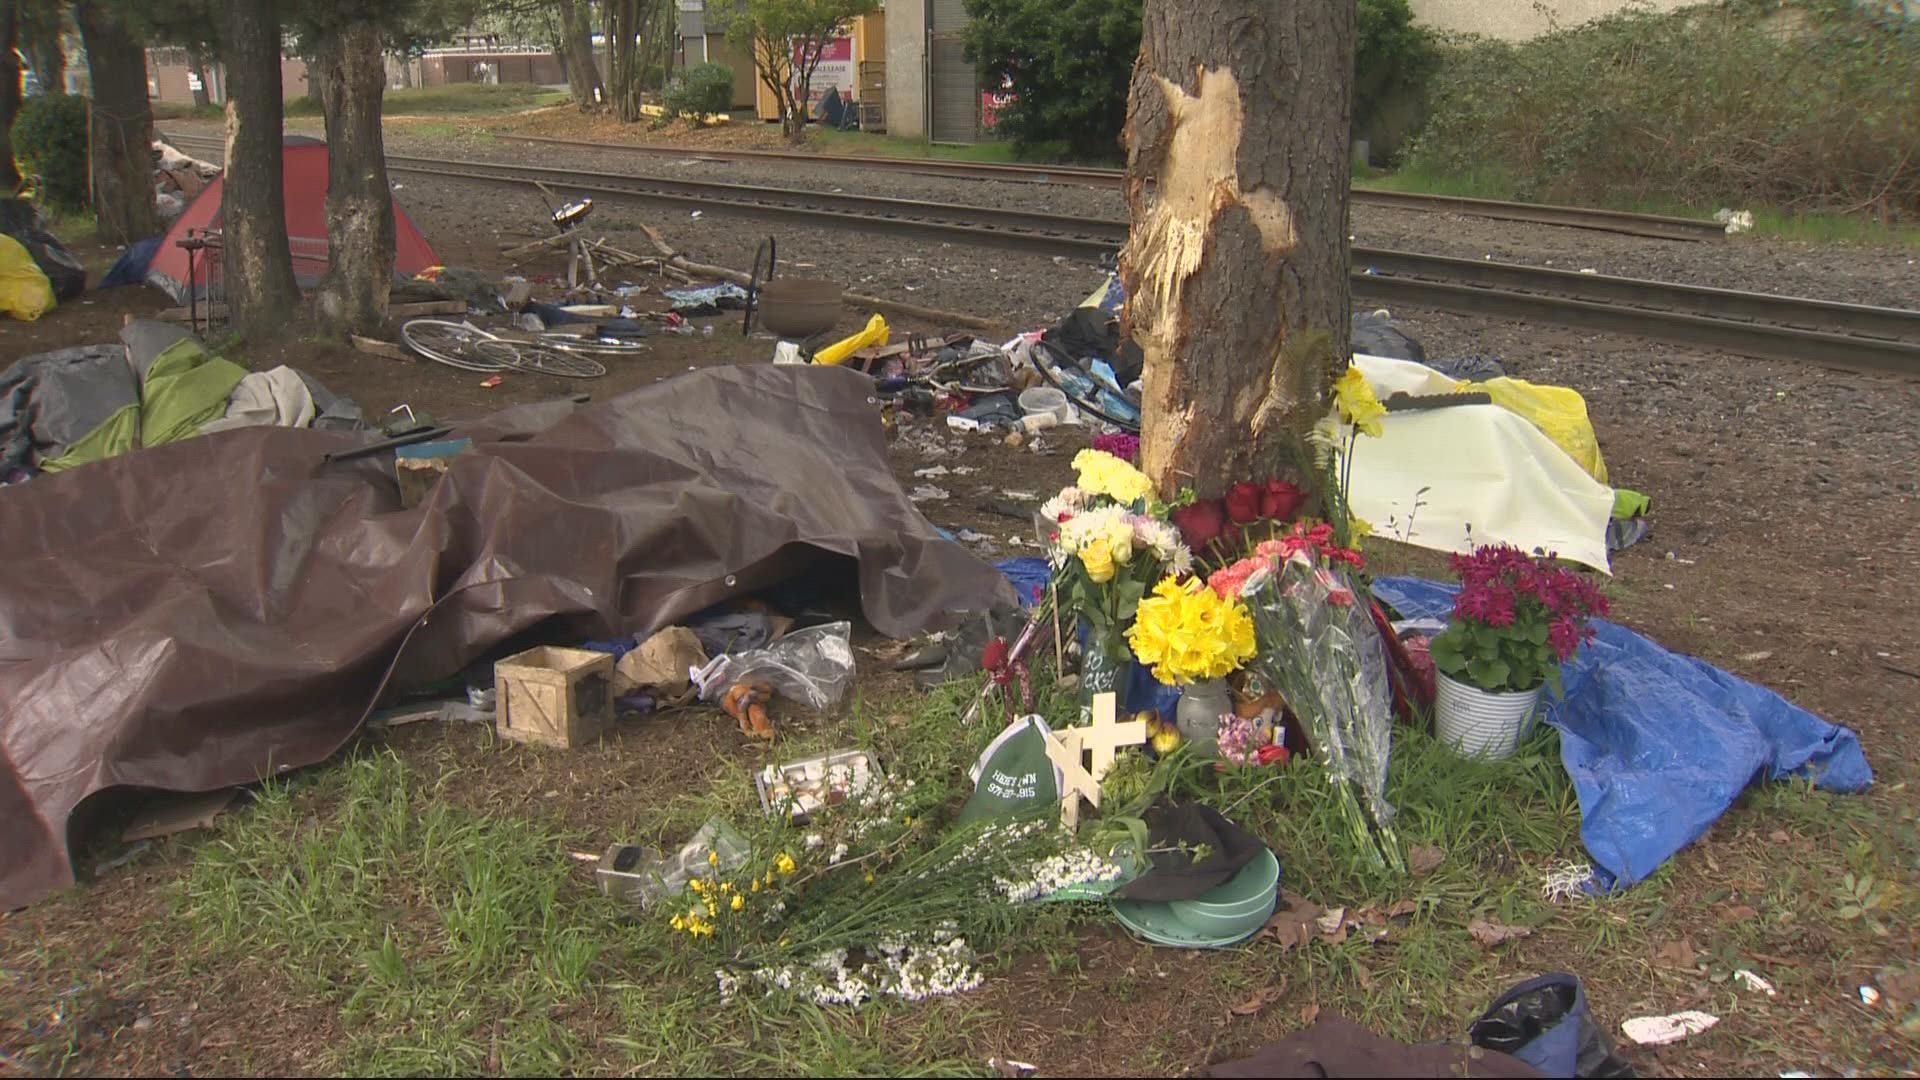 Four people were killed on Sunday when a driver crashed into a homeless camp. Friends are speaking up to remember the victims.